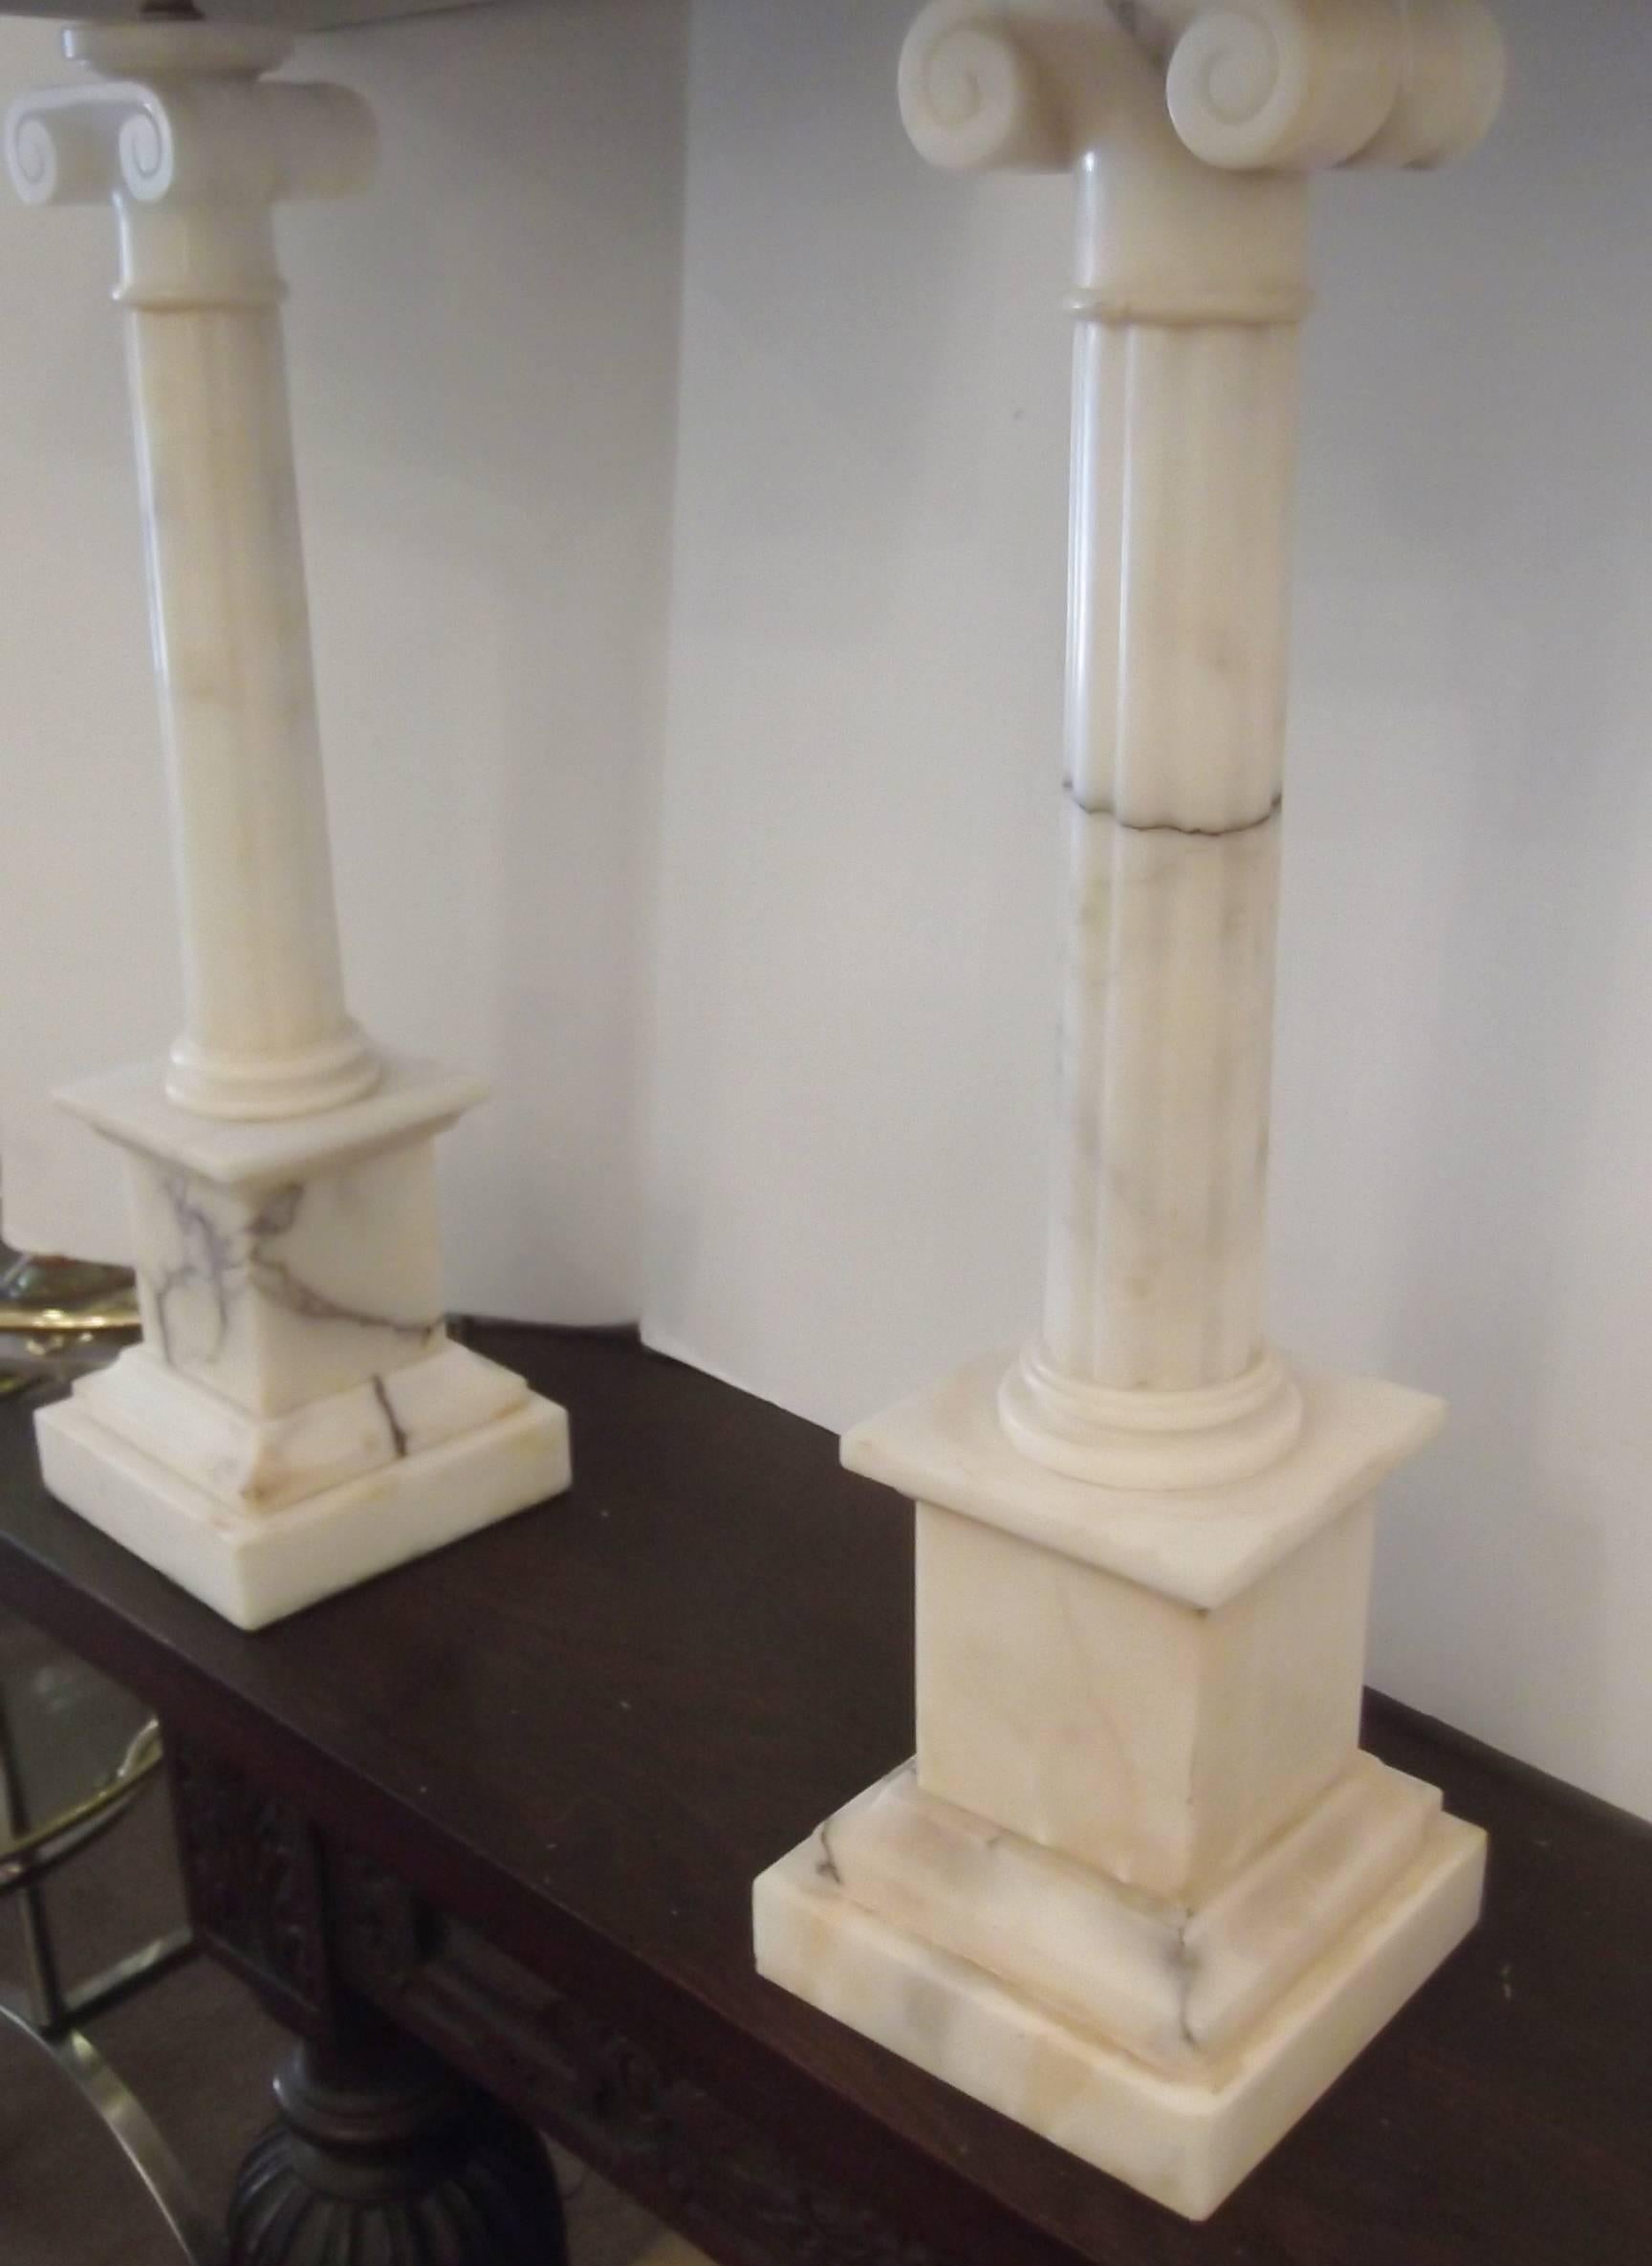 A handsome pair of Italian marble column lamps.
Classic Ionic capitol topped columns with fluted center columns on plinth bases. These are a solid marble with the grey veining. Paired with a simple black shade this look appropriate in any style